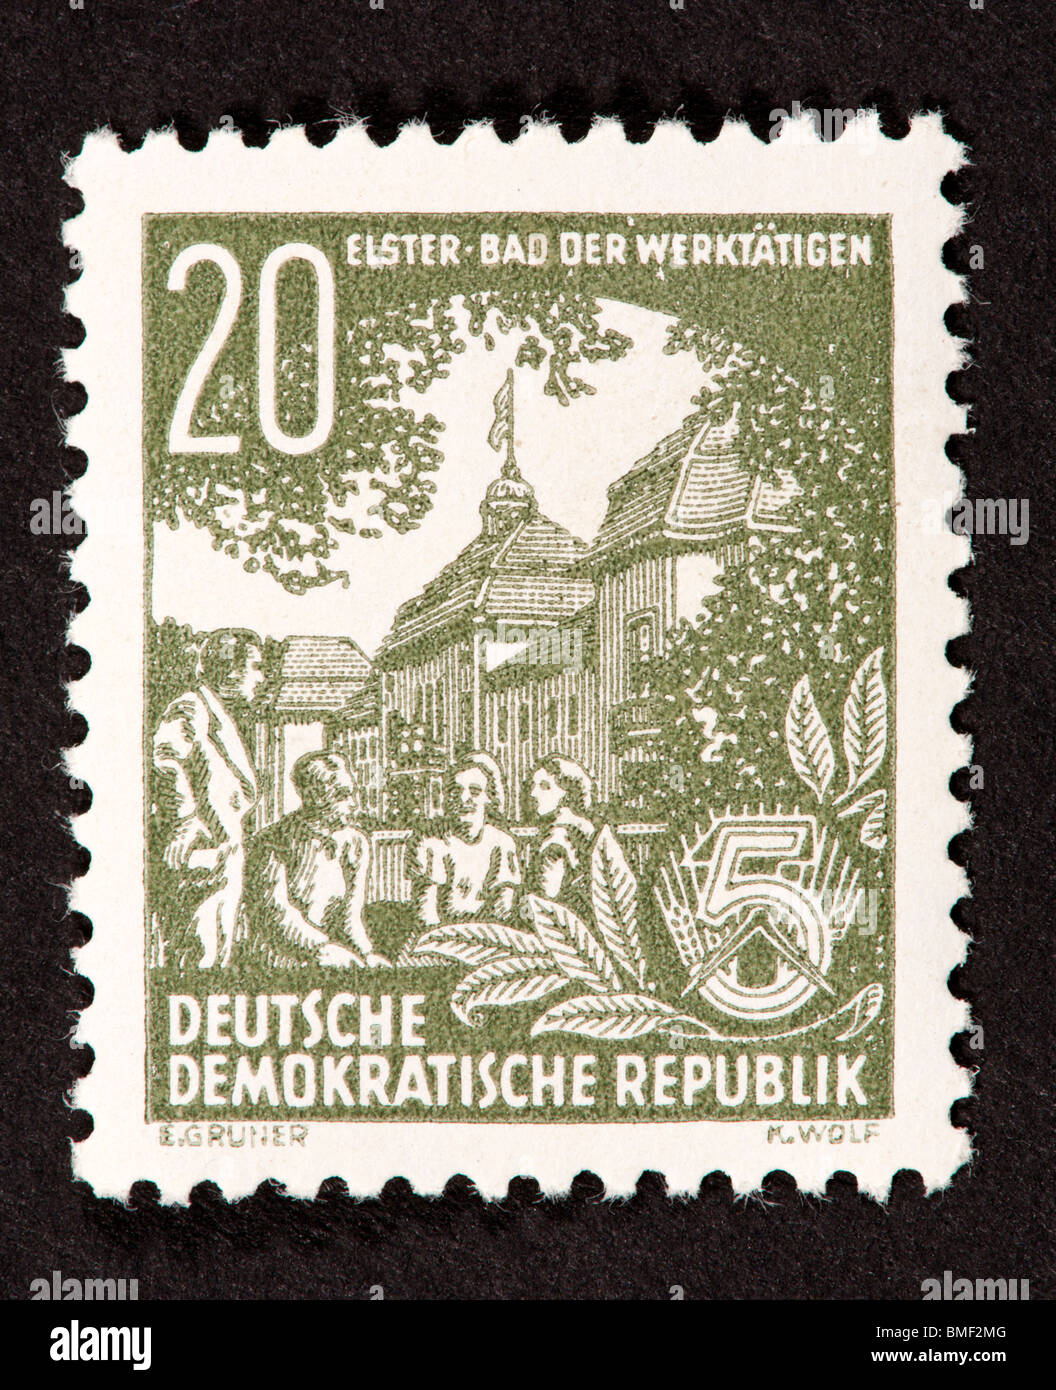 Postage stamp from East Germany (German Democratic Republic) depicting Bad Elster. Stock Photo